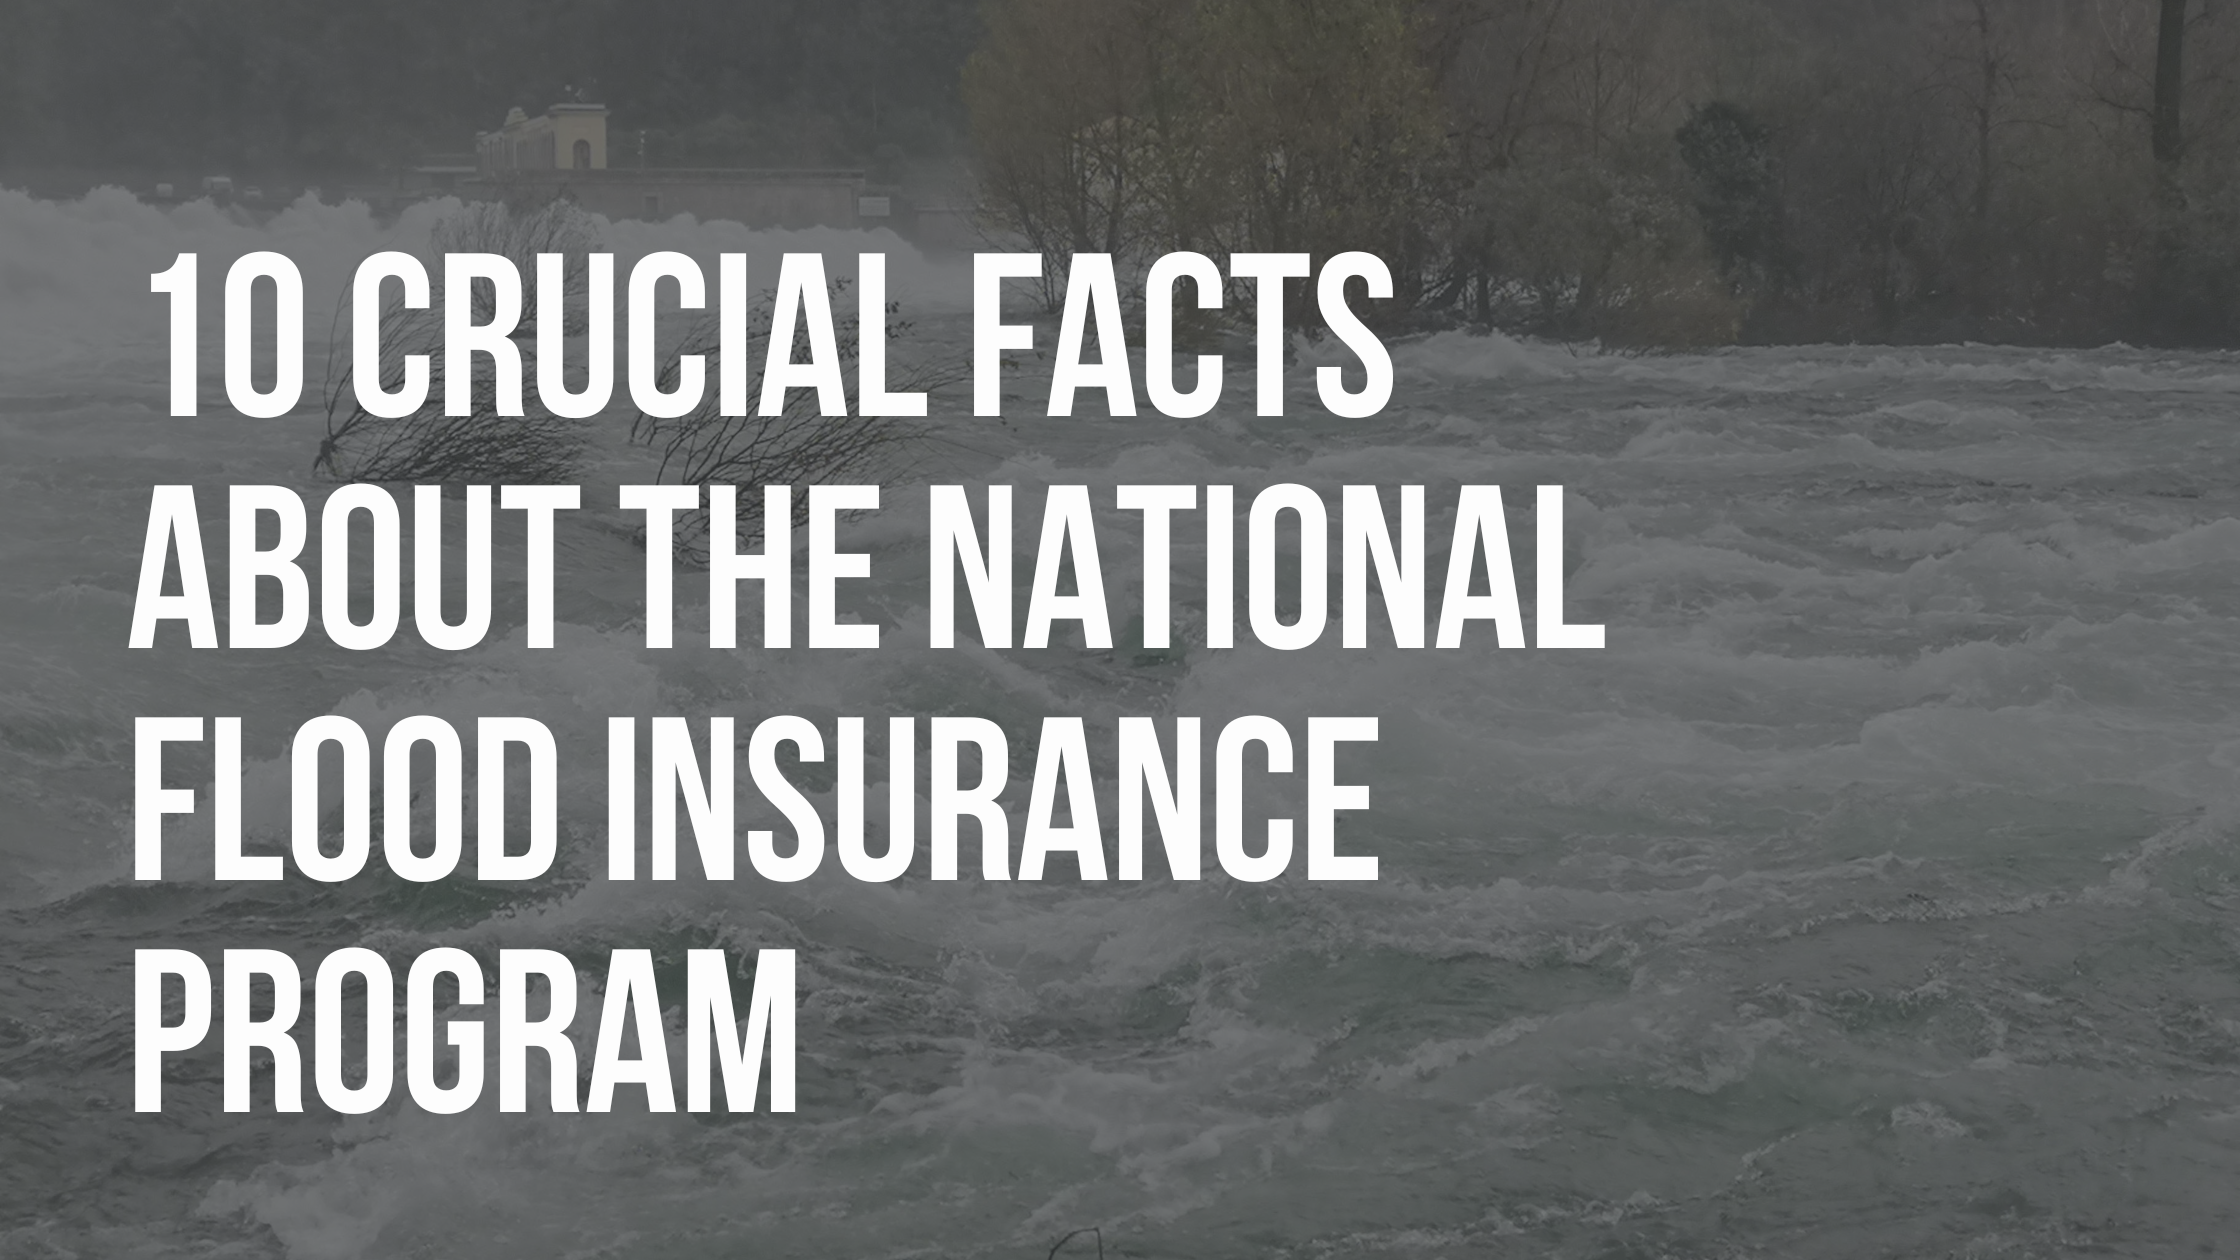 10 Crucial Facts About the National Flood Insurance Program